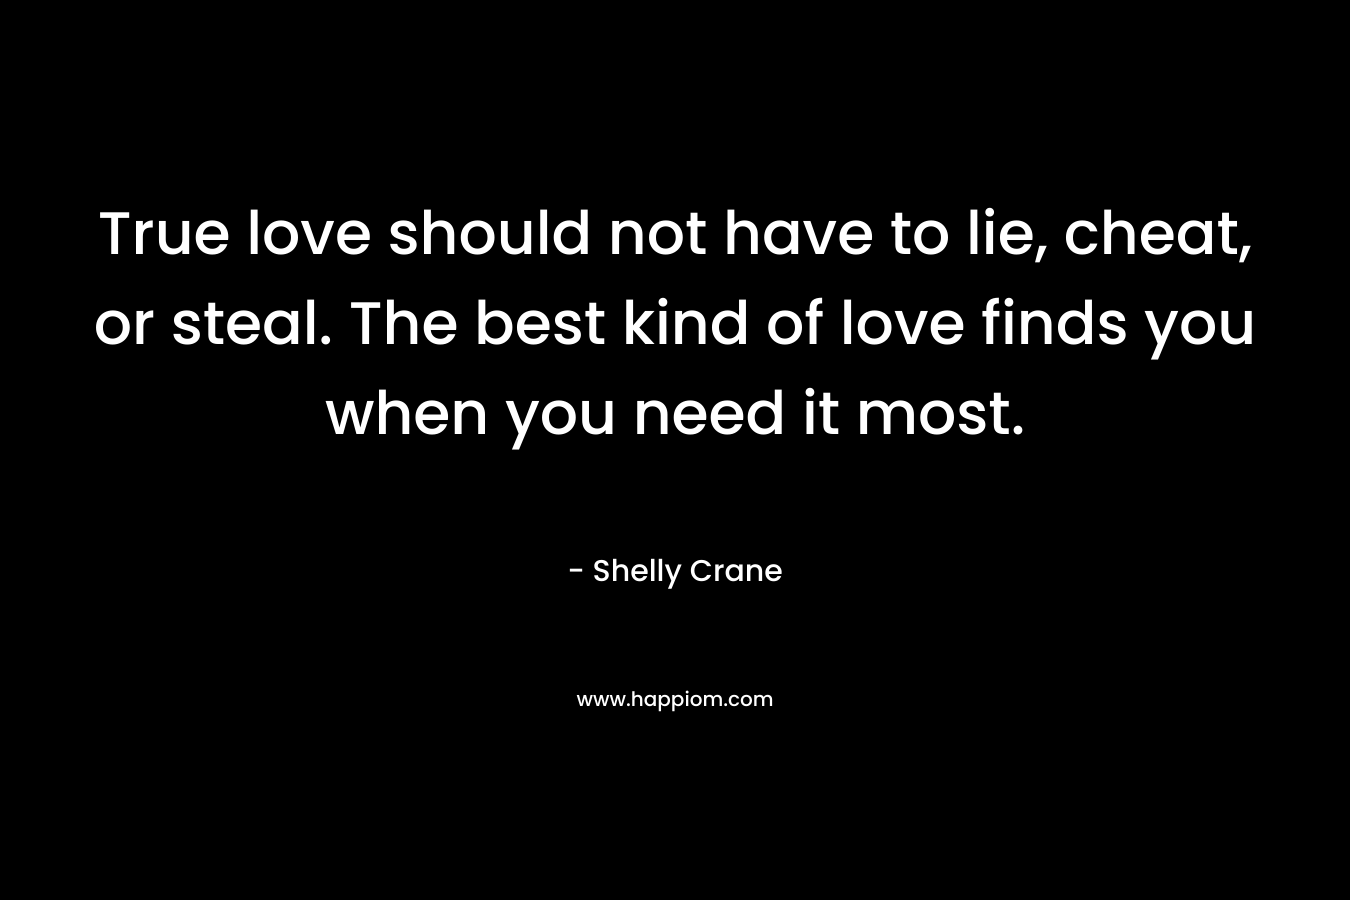 True love should not have to lie, cheat, or steal. The best kind of love finds you when you need it most.